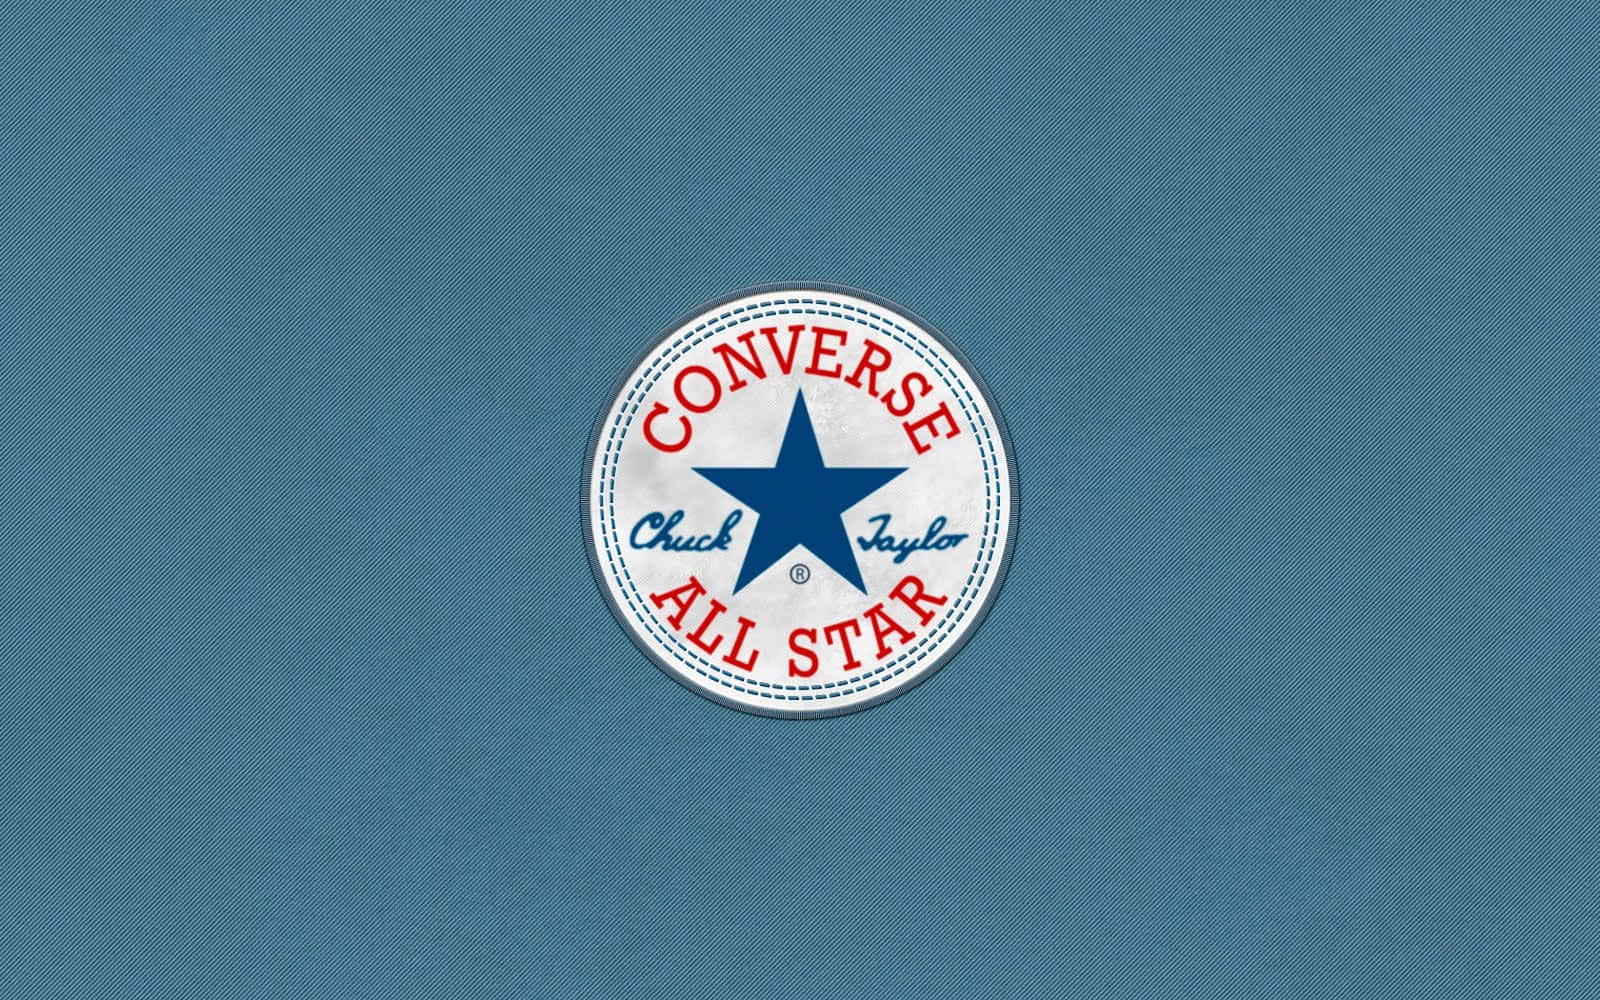 A View of the Converse Logo